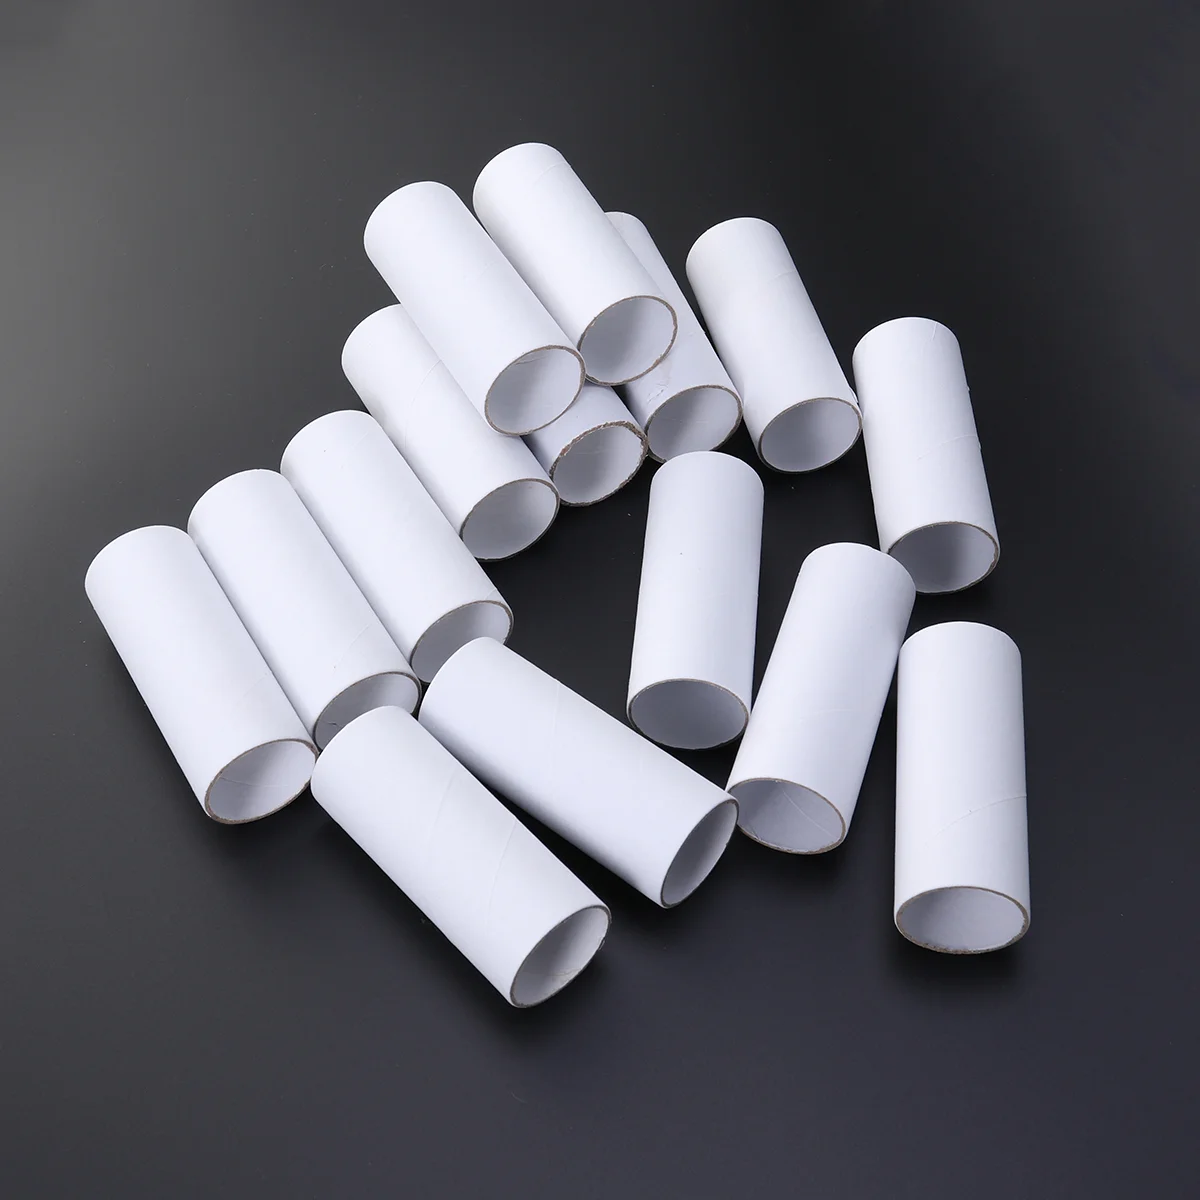 15 PCS Squiz Toys Cardboard Rolls Crafts Round Tubes Developmental Puzzle Recycled Coiled